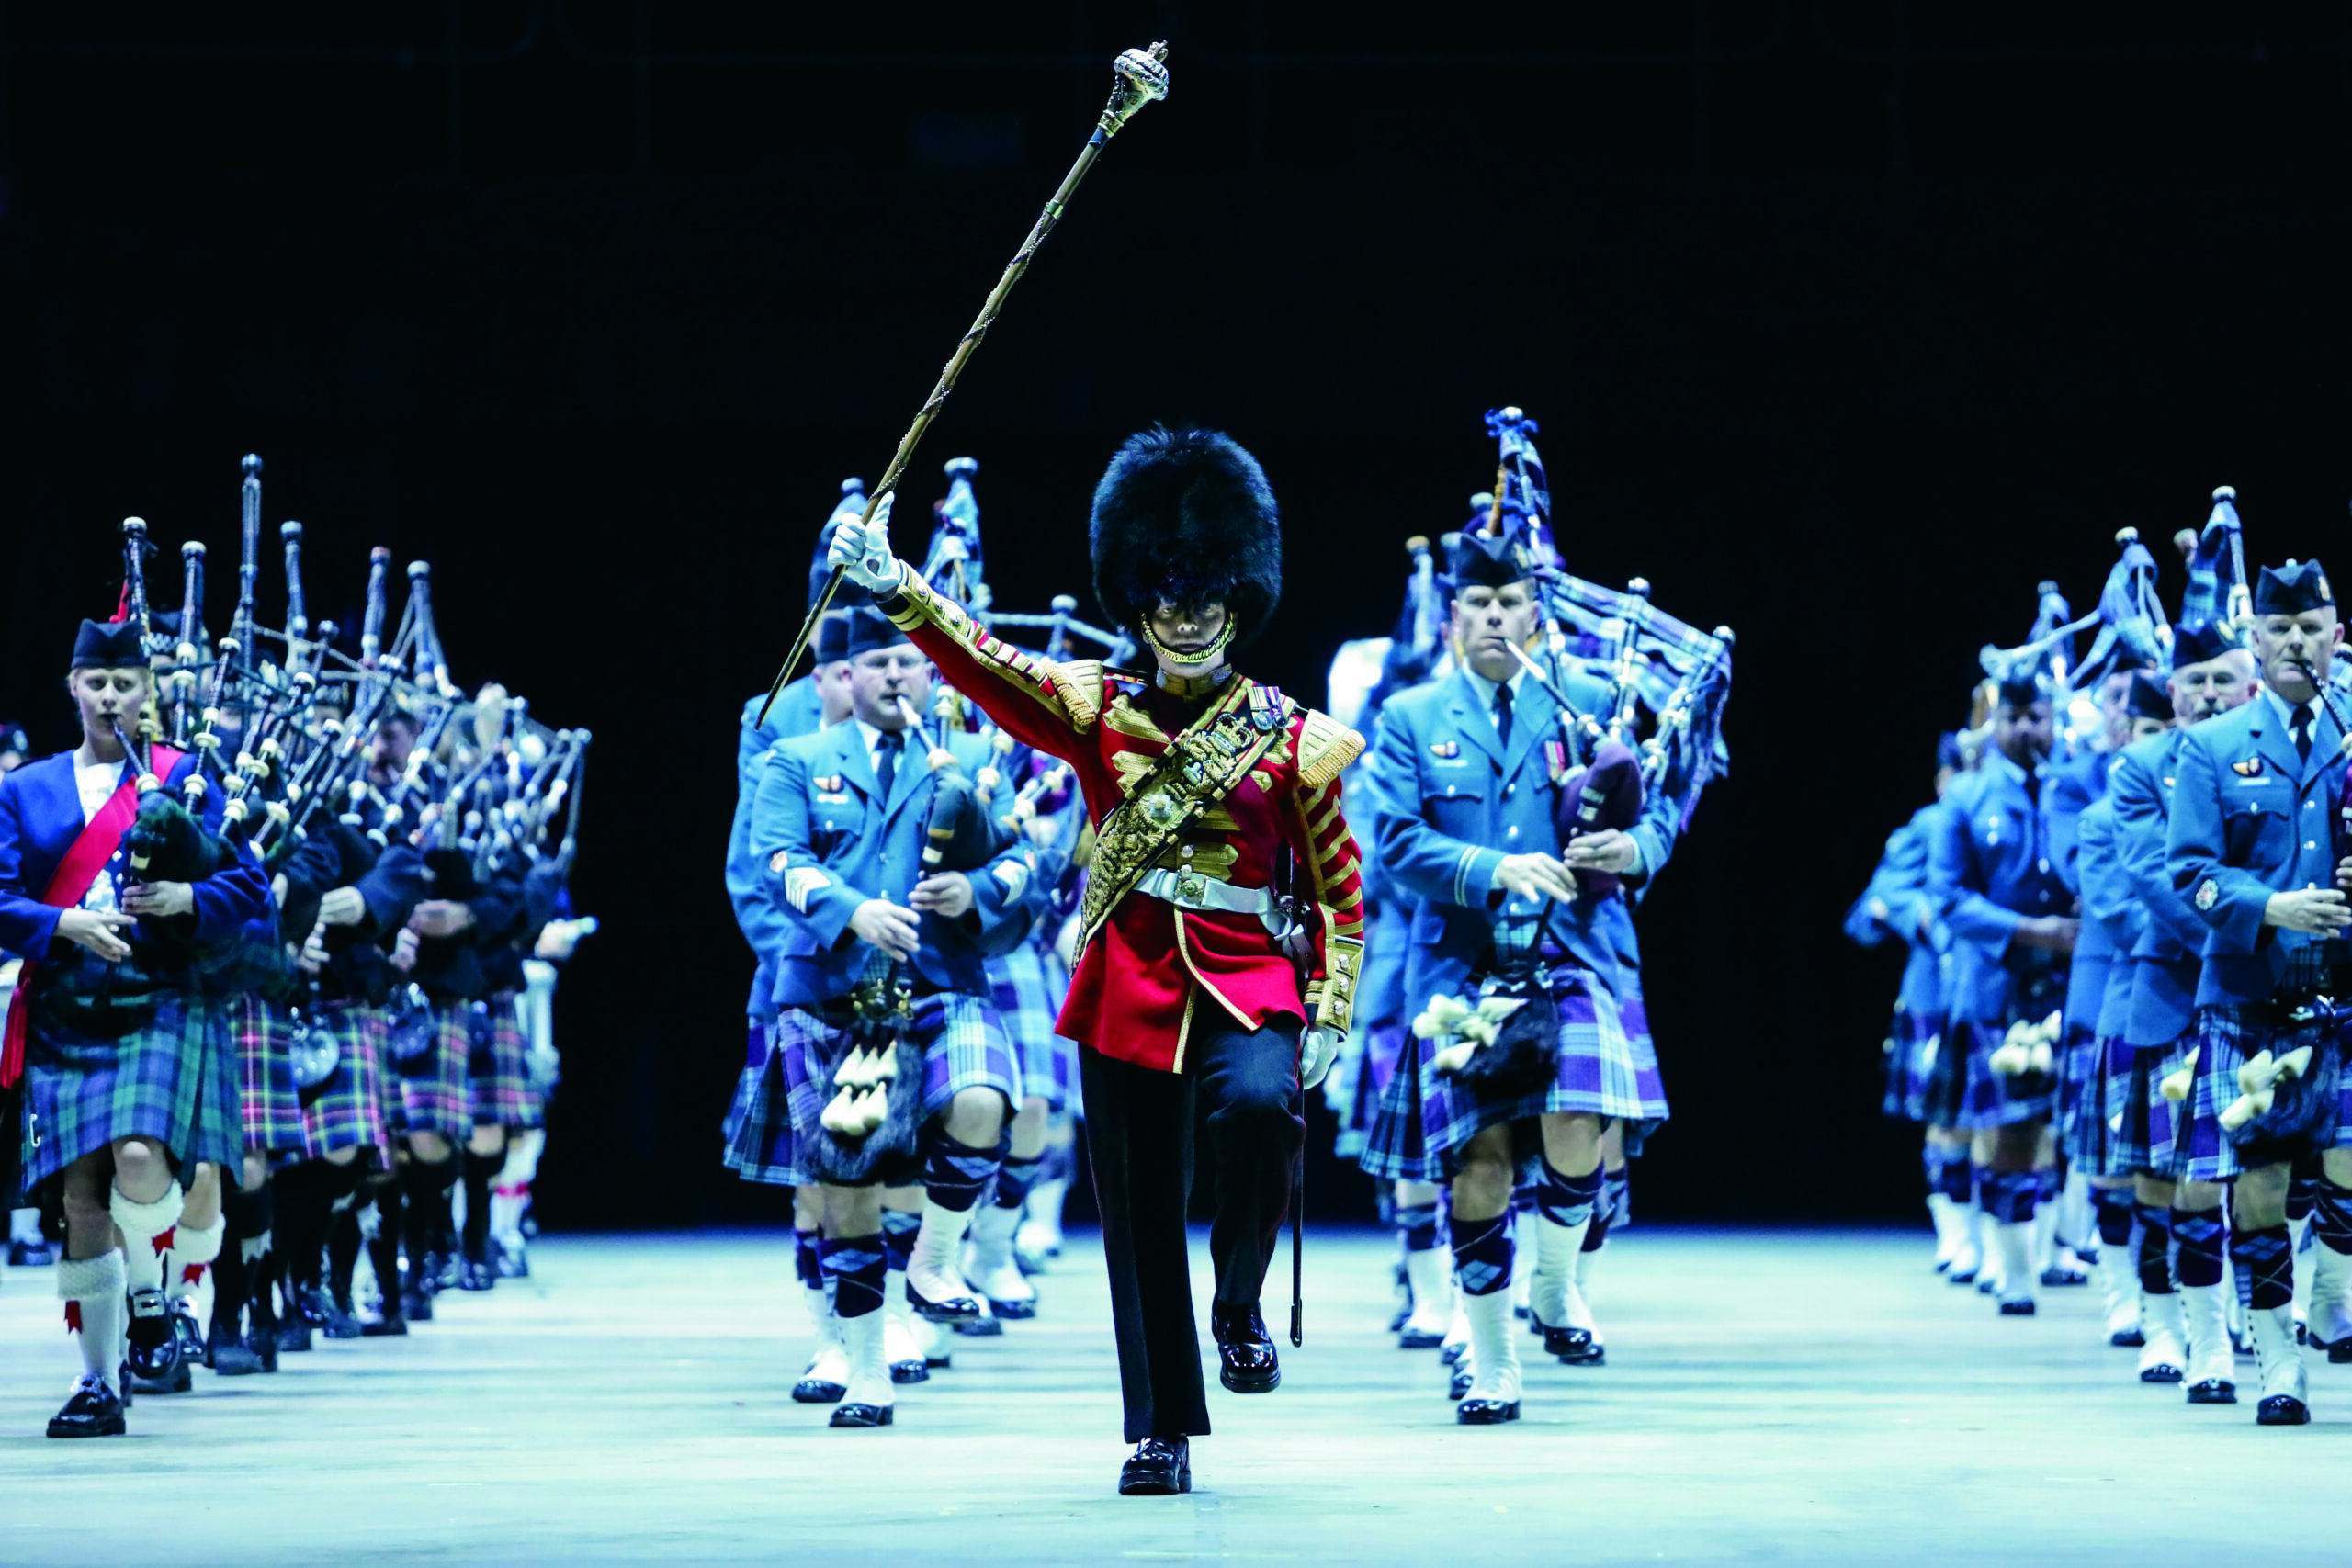 Men dressed in British Guard attire and Kilts playing bagpipes